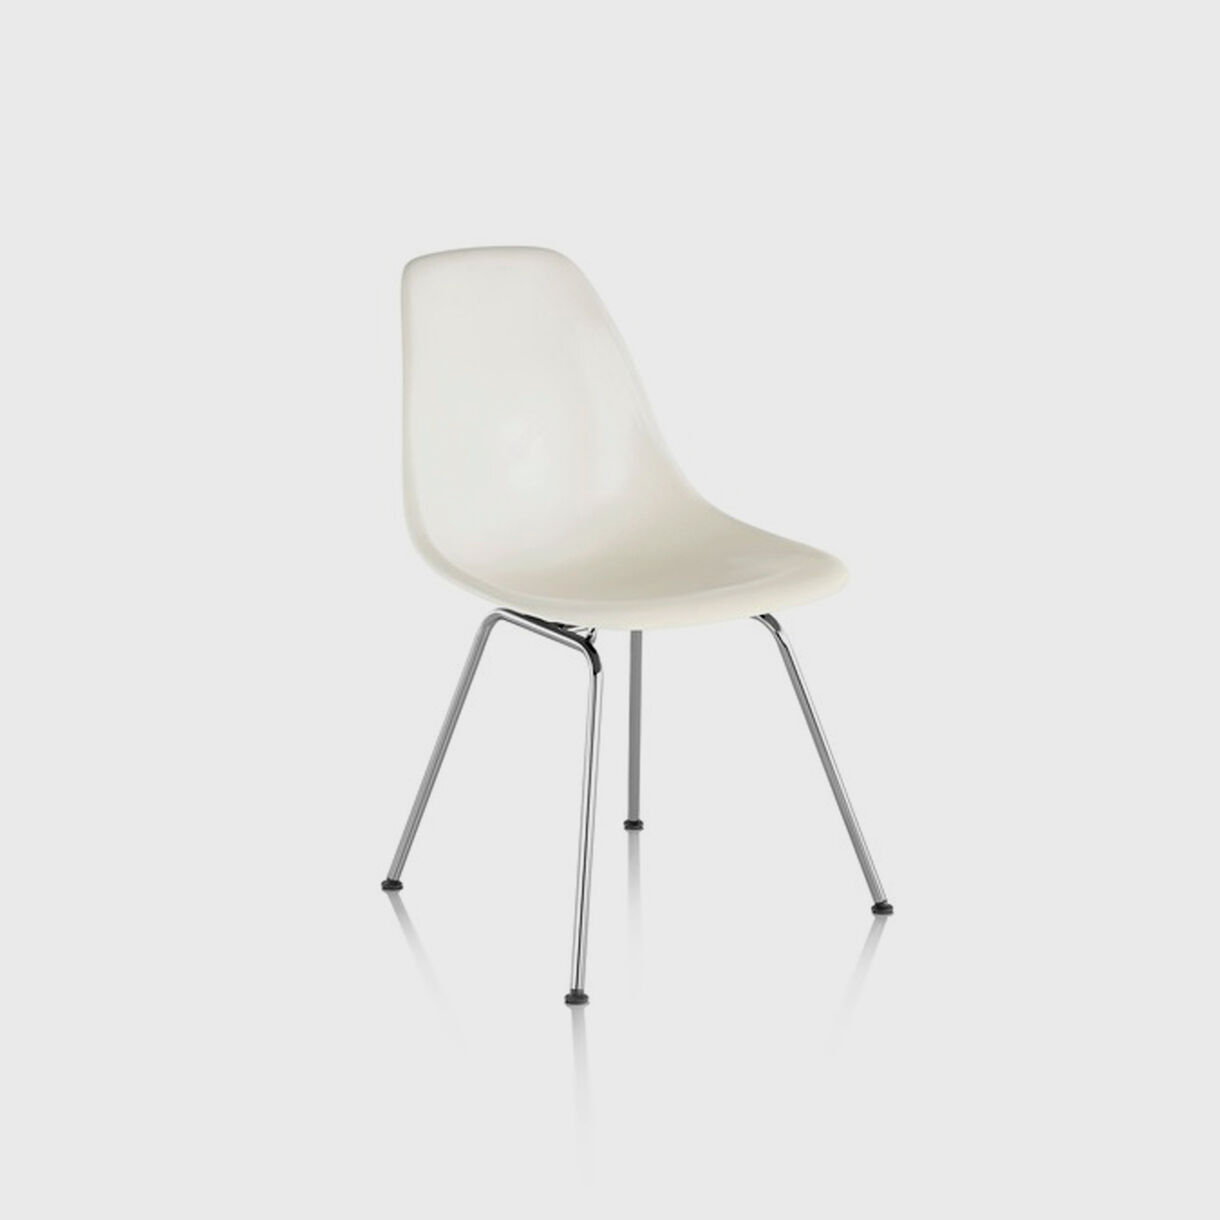 Eames Moulded Plastic Side Chair